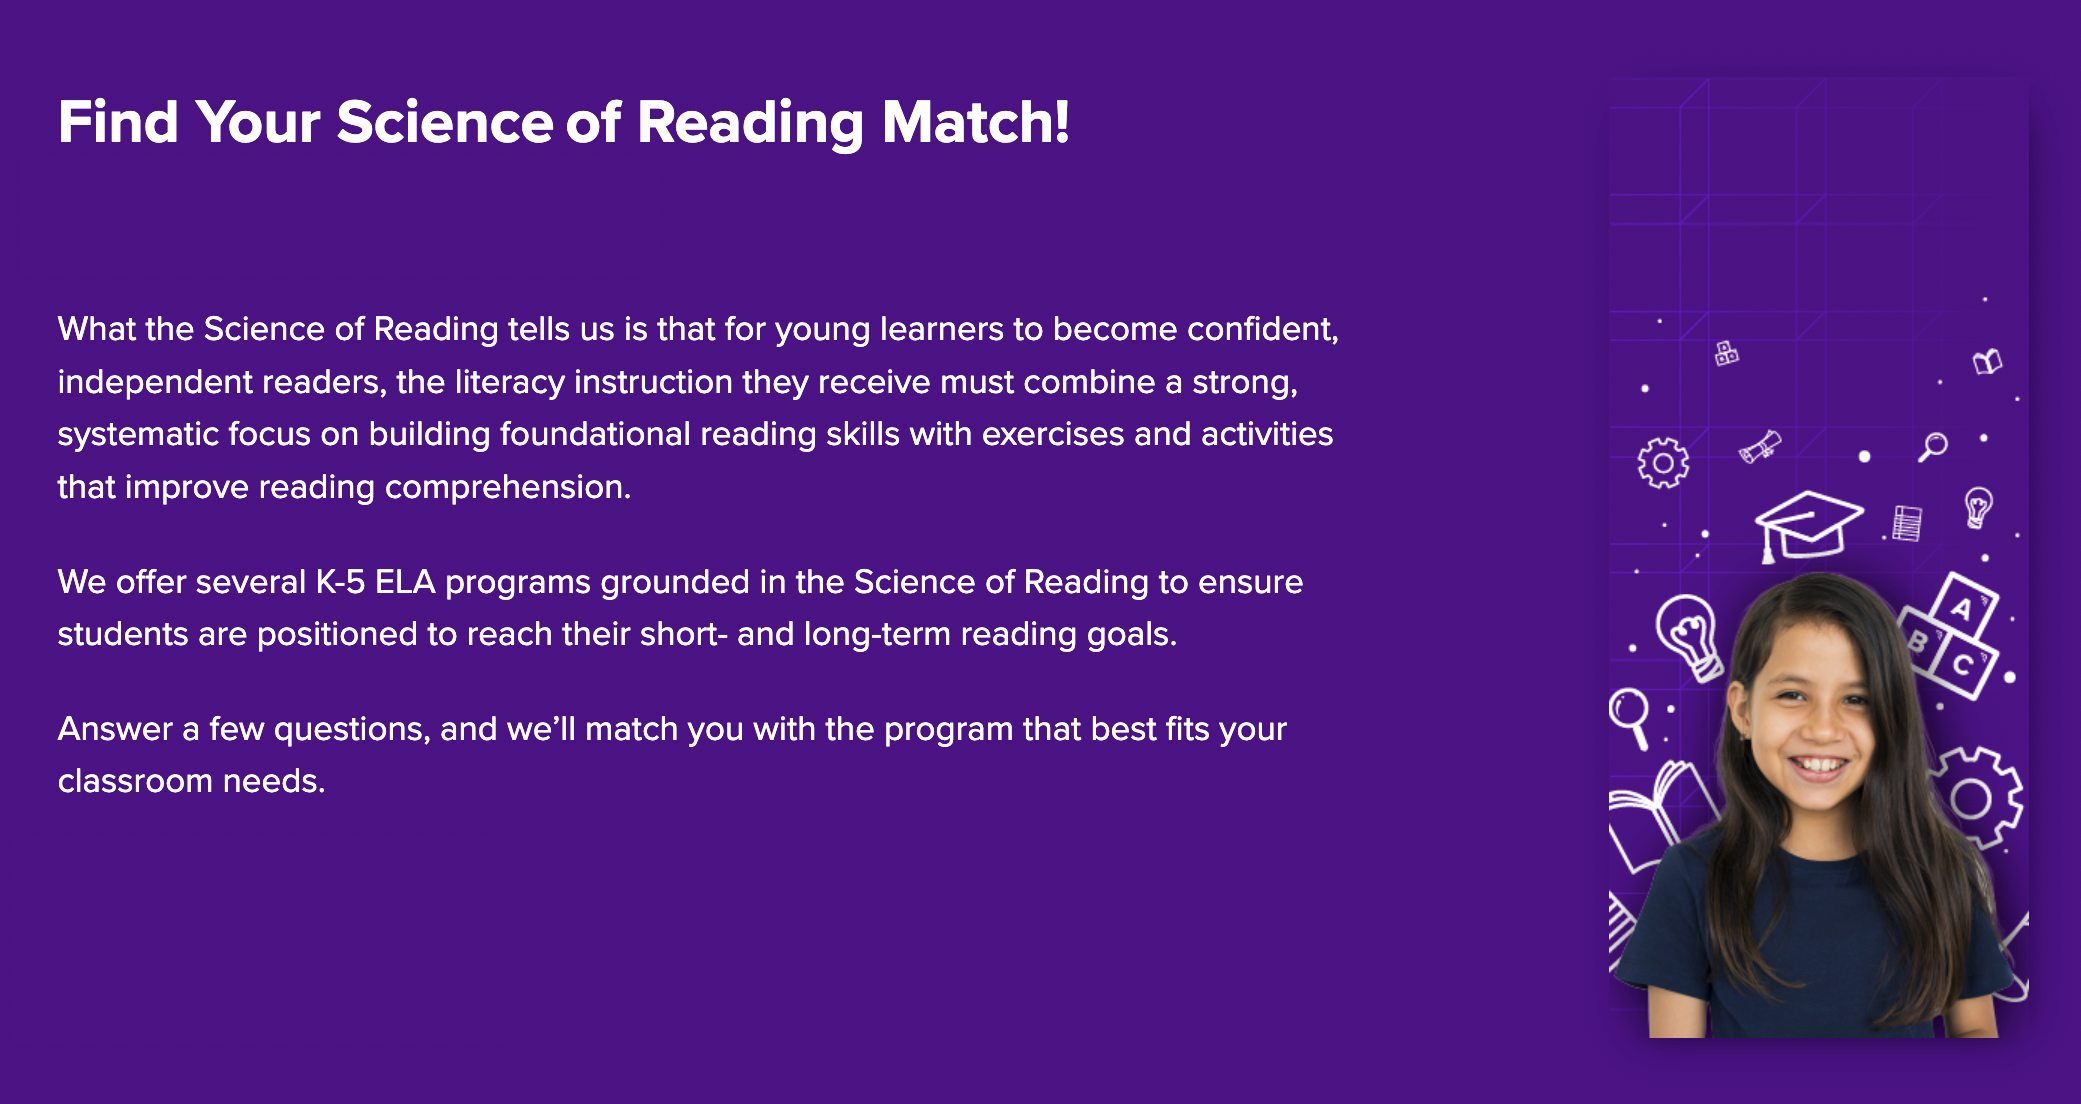 Find Your Science of Reading Match! What the Science of Reading tells us is that for young learners to become confident, independent readers, the literacy instruction they receive must combine a strong, systematic focus on building foundational reading skills with exercises and activities that improve reading comprehension.  We offer several K-5 ELA programs grounded in the Science of Reading to ensure students are positioned to reach their short- and long-term reading goals.  Answer a few questions, and we’ll match you with the program that best fits your classroom needs.